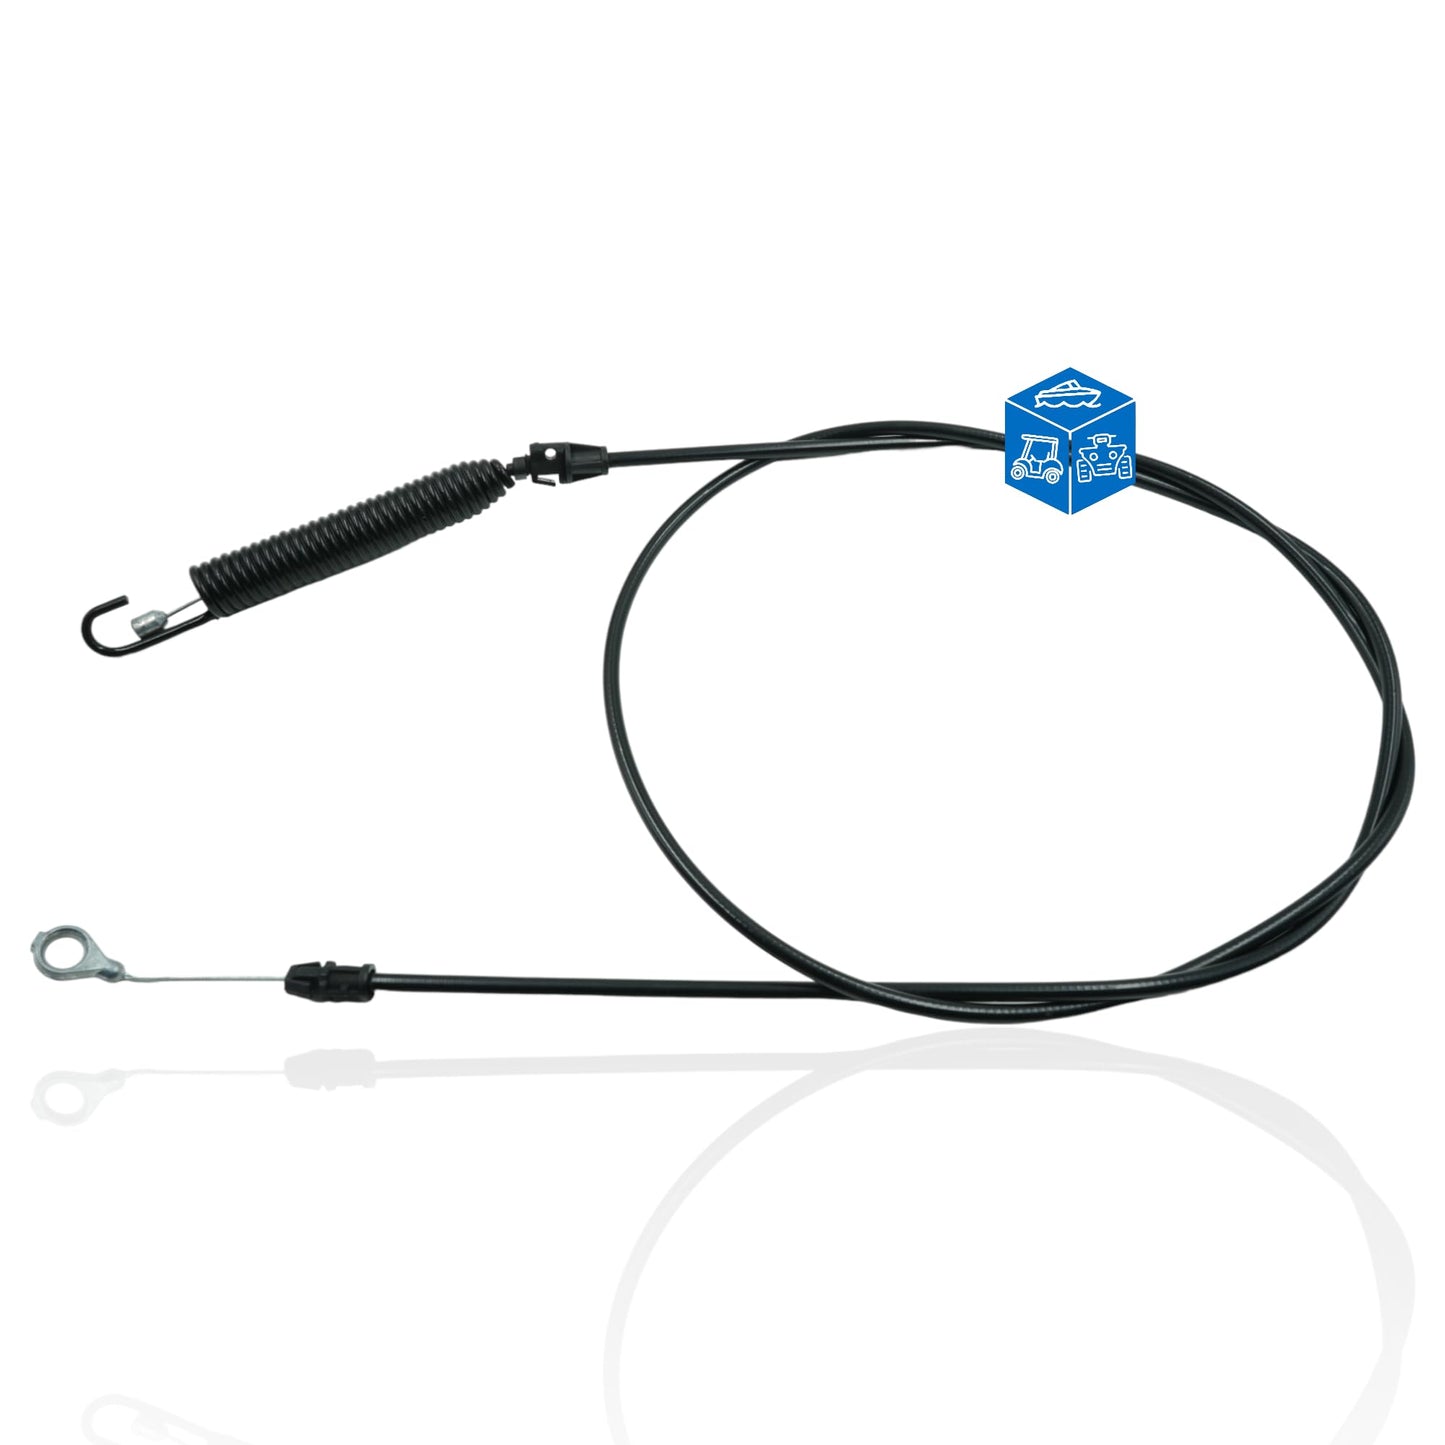 New Replacement Clutch Cable for Husqvarna 532435111